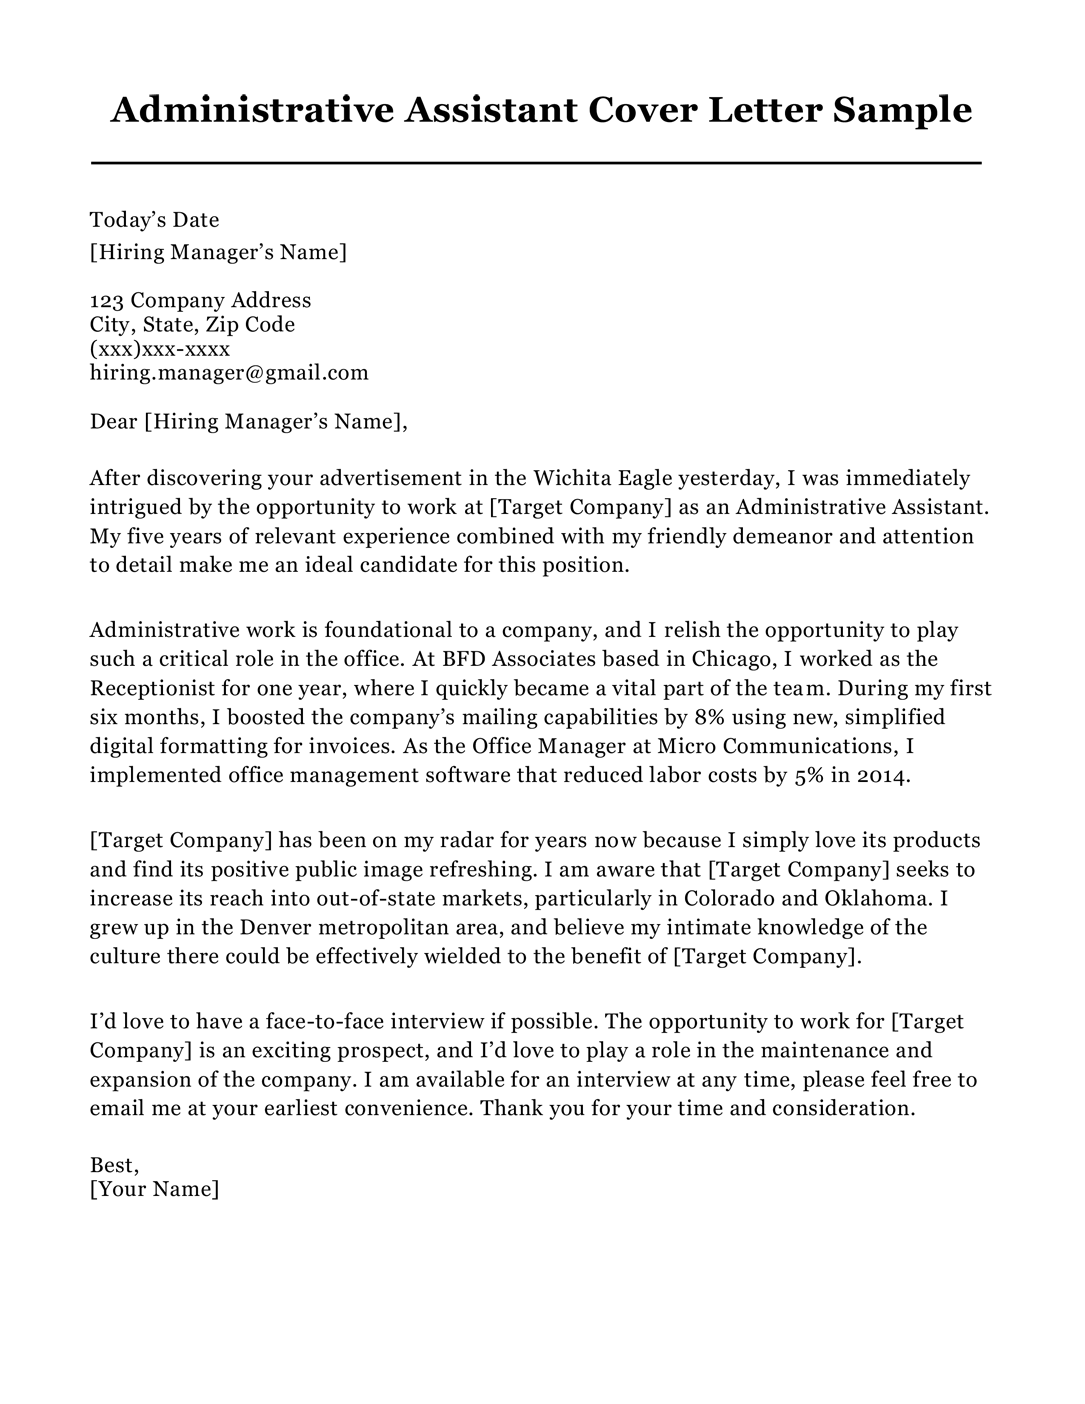 Cover Letter Without Company Address from resumecompanion.com